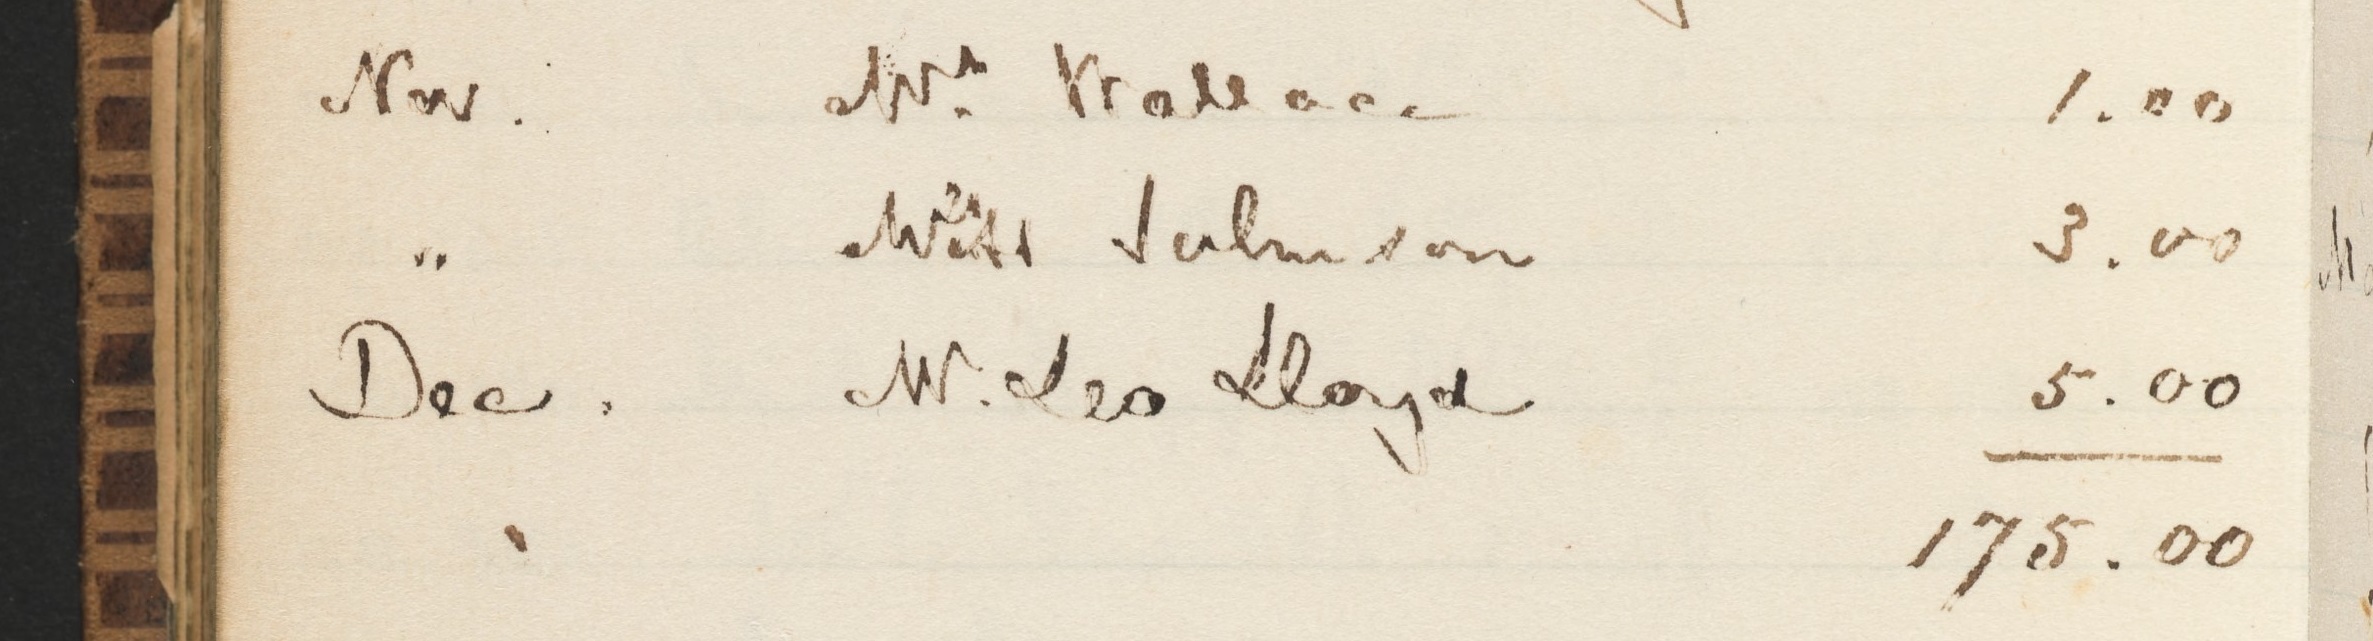 Lines from Longfellow's account book, featuring Jane Johnson.